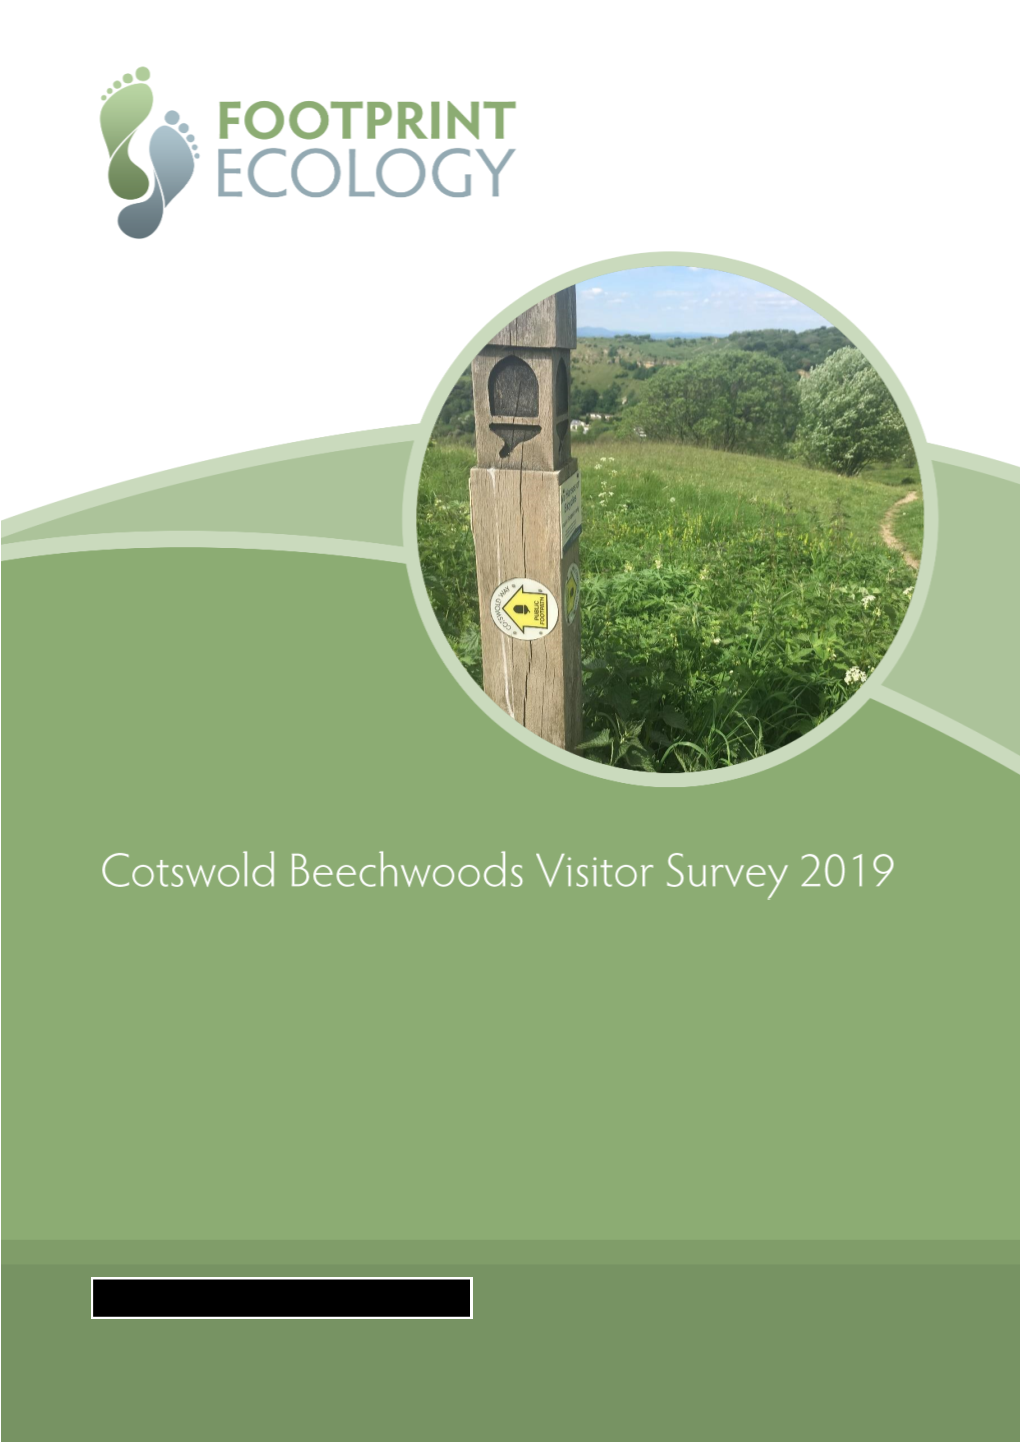 Cotswold Beechwoods Visitor Survey 2019